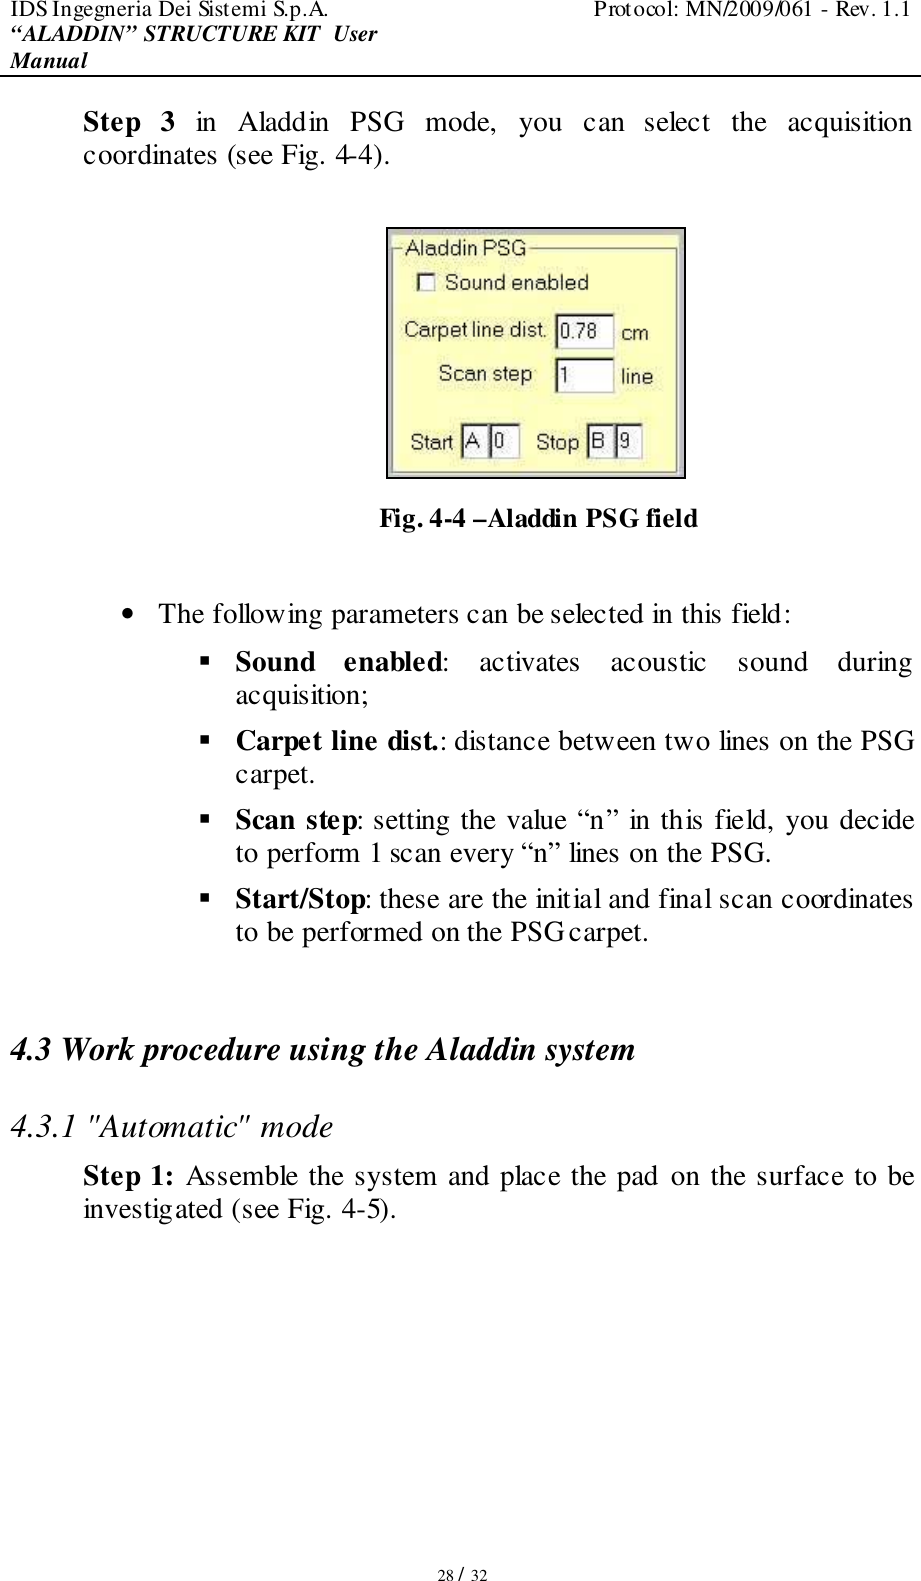 IDS Ingegneria Dei Sistemi S.p.A.  Protocol: MN/2009/061 - Rev. 1.1 “ALADDIN” STRUCTURE KIT  User Manual   28 / 32 Step  3  in Aladdin  PSG  mode,  you  can  select  the  acquisition coordinates (see Fig. 4-4).   Fig. 4-4 –Aladdin PSG field  • The following parameters can be selected in this field:  Sound  enabled:  activates  acoustic  sound  during acquisition;  Carpet line dist.: distance between two lines on the PSG carpet.  Scan step: setting the value “n” in this field, you decide to perform 1 scan every “n” lines on the PSG.  Start/Stop: these are the initial and final scan coordinates to be performed on the PSG carpet.  4.3 Work procedure using the Aladdin system 4.3.1 &quot;Automatic&quot; mode  Step 1: Assemble the system and place the pad on the surface to be investigated (see Fig. 4-5).   